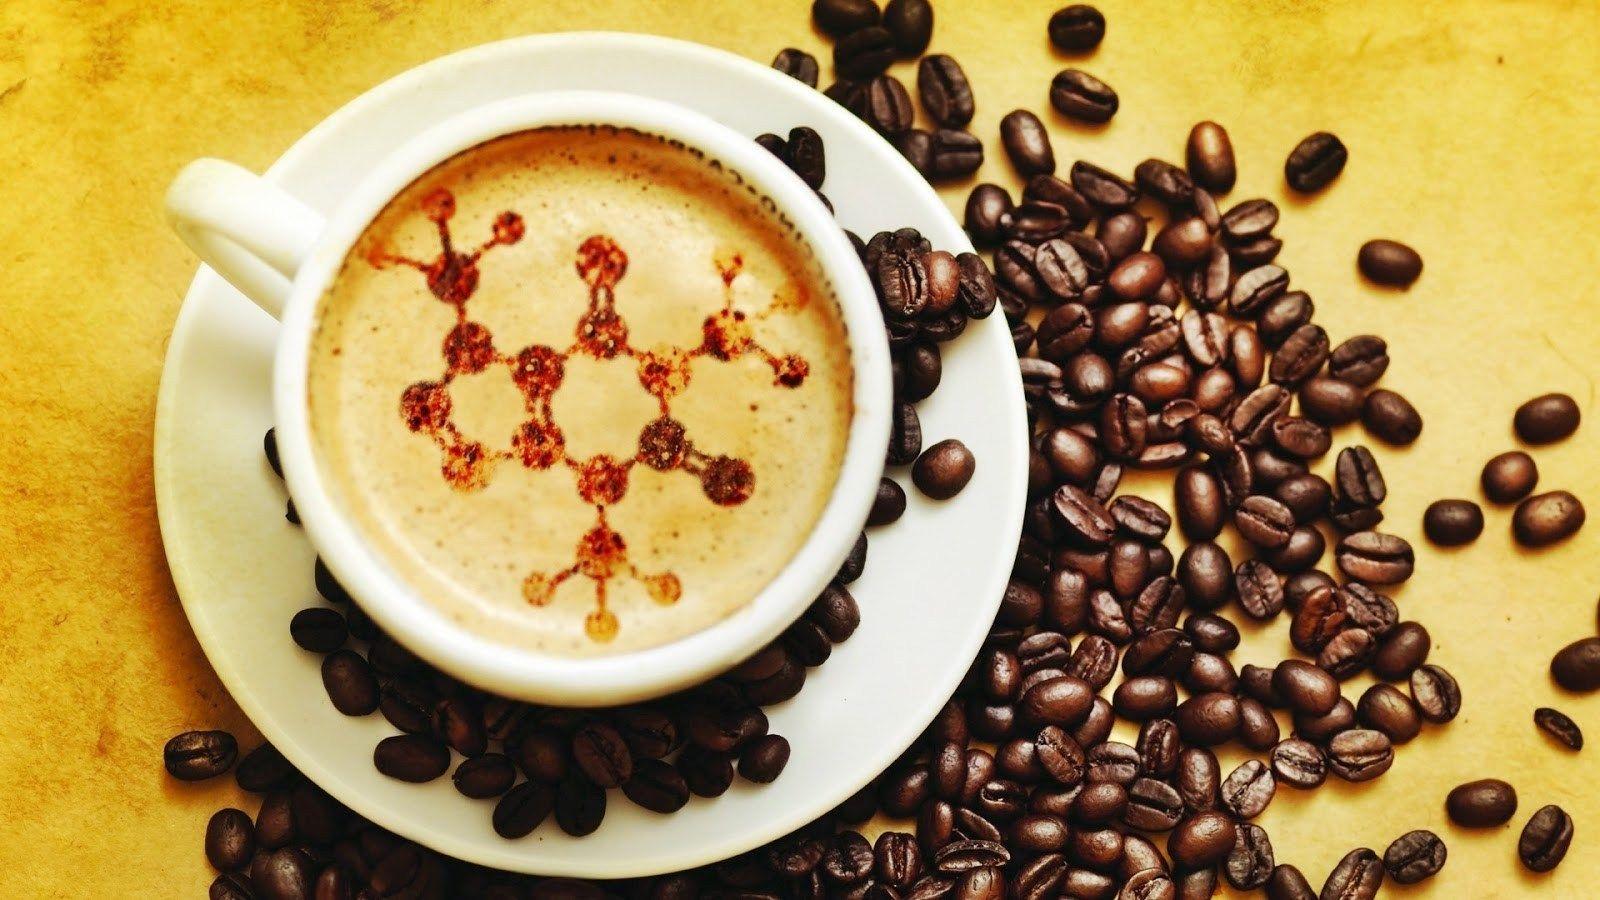 Chemistry Structure In Coffee And Beans Hd Wallpaper. Chem